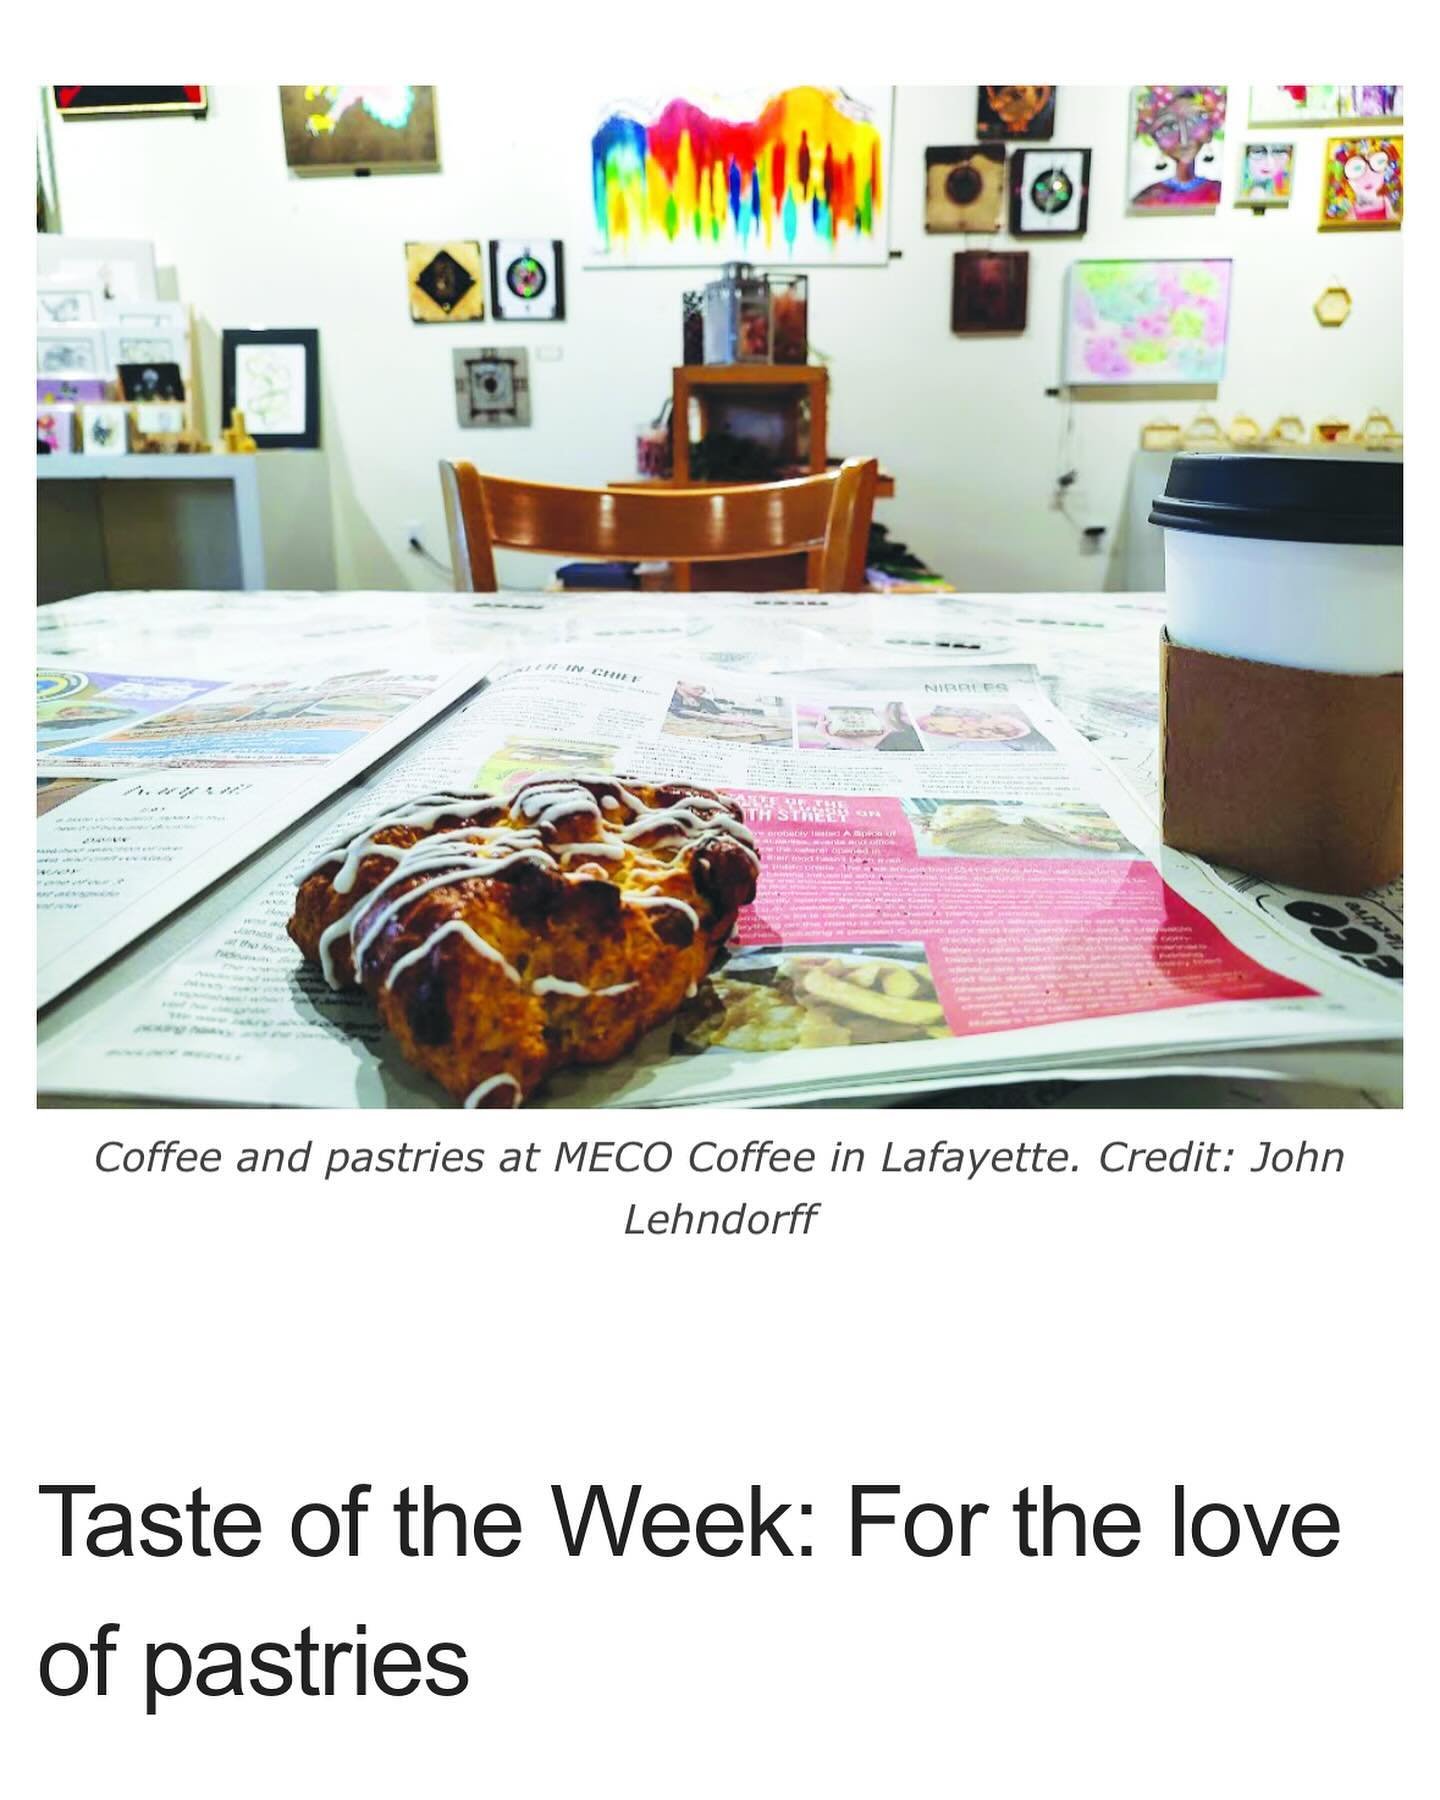 Thank for the feature @boulderweekly!
If you wanna check out the whole article find it in the link in our bio 🥐☕️

#longmont #longmontsmallbusiness #lafayette
#lafayettesmallbusiness #eriecolorado #louisvilleco
#superiorcolorado #broomfieldcolorado 